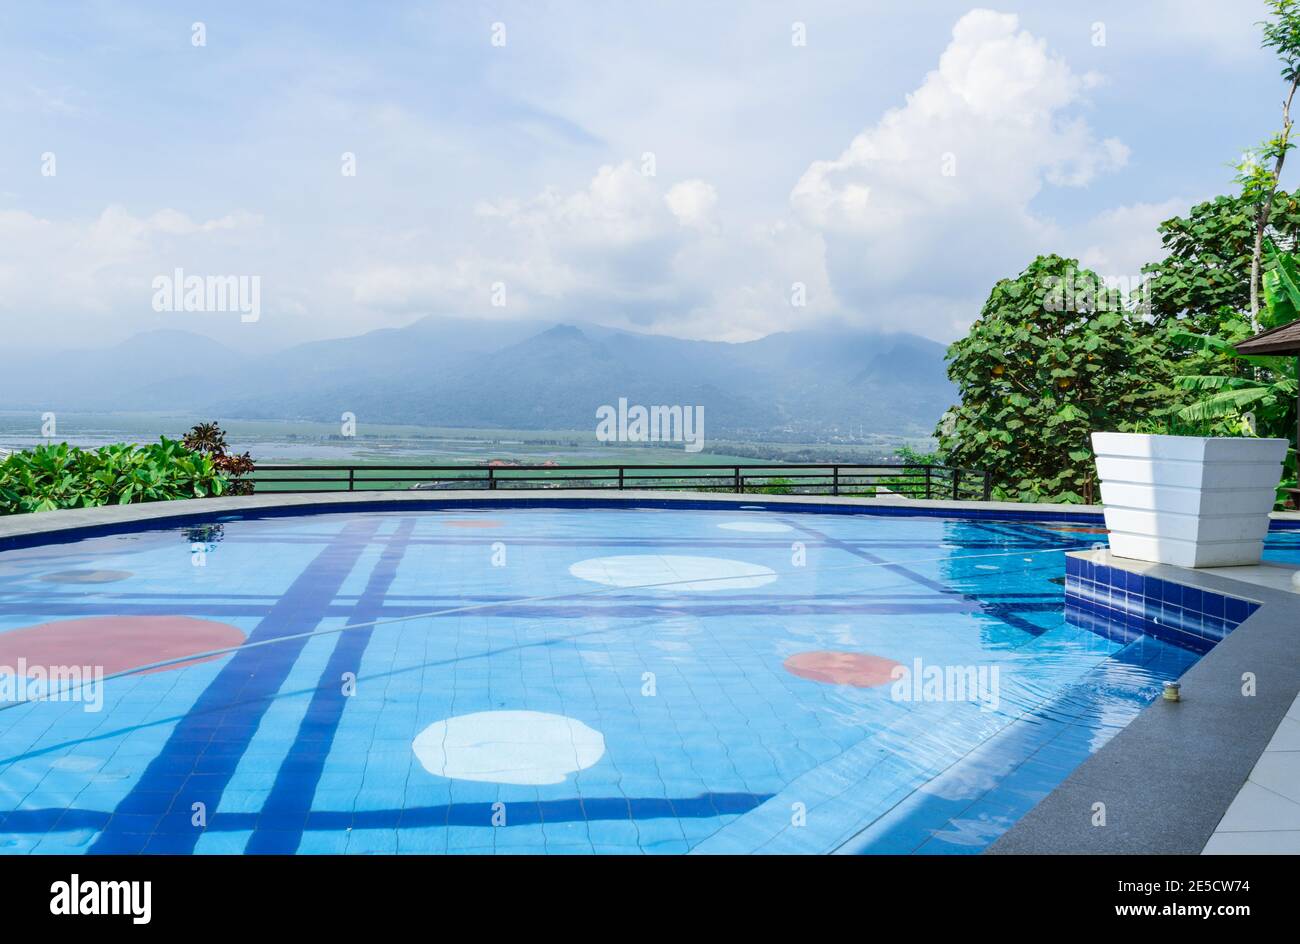 This swimming pool is inside the 'Eling Bening' tourist spot, located in Ambarawa district, Central Java. from there you can see the 'Pening Swamp' Stock Photo